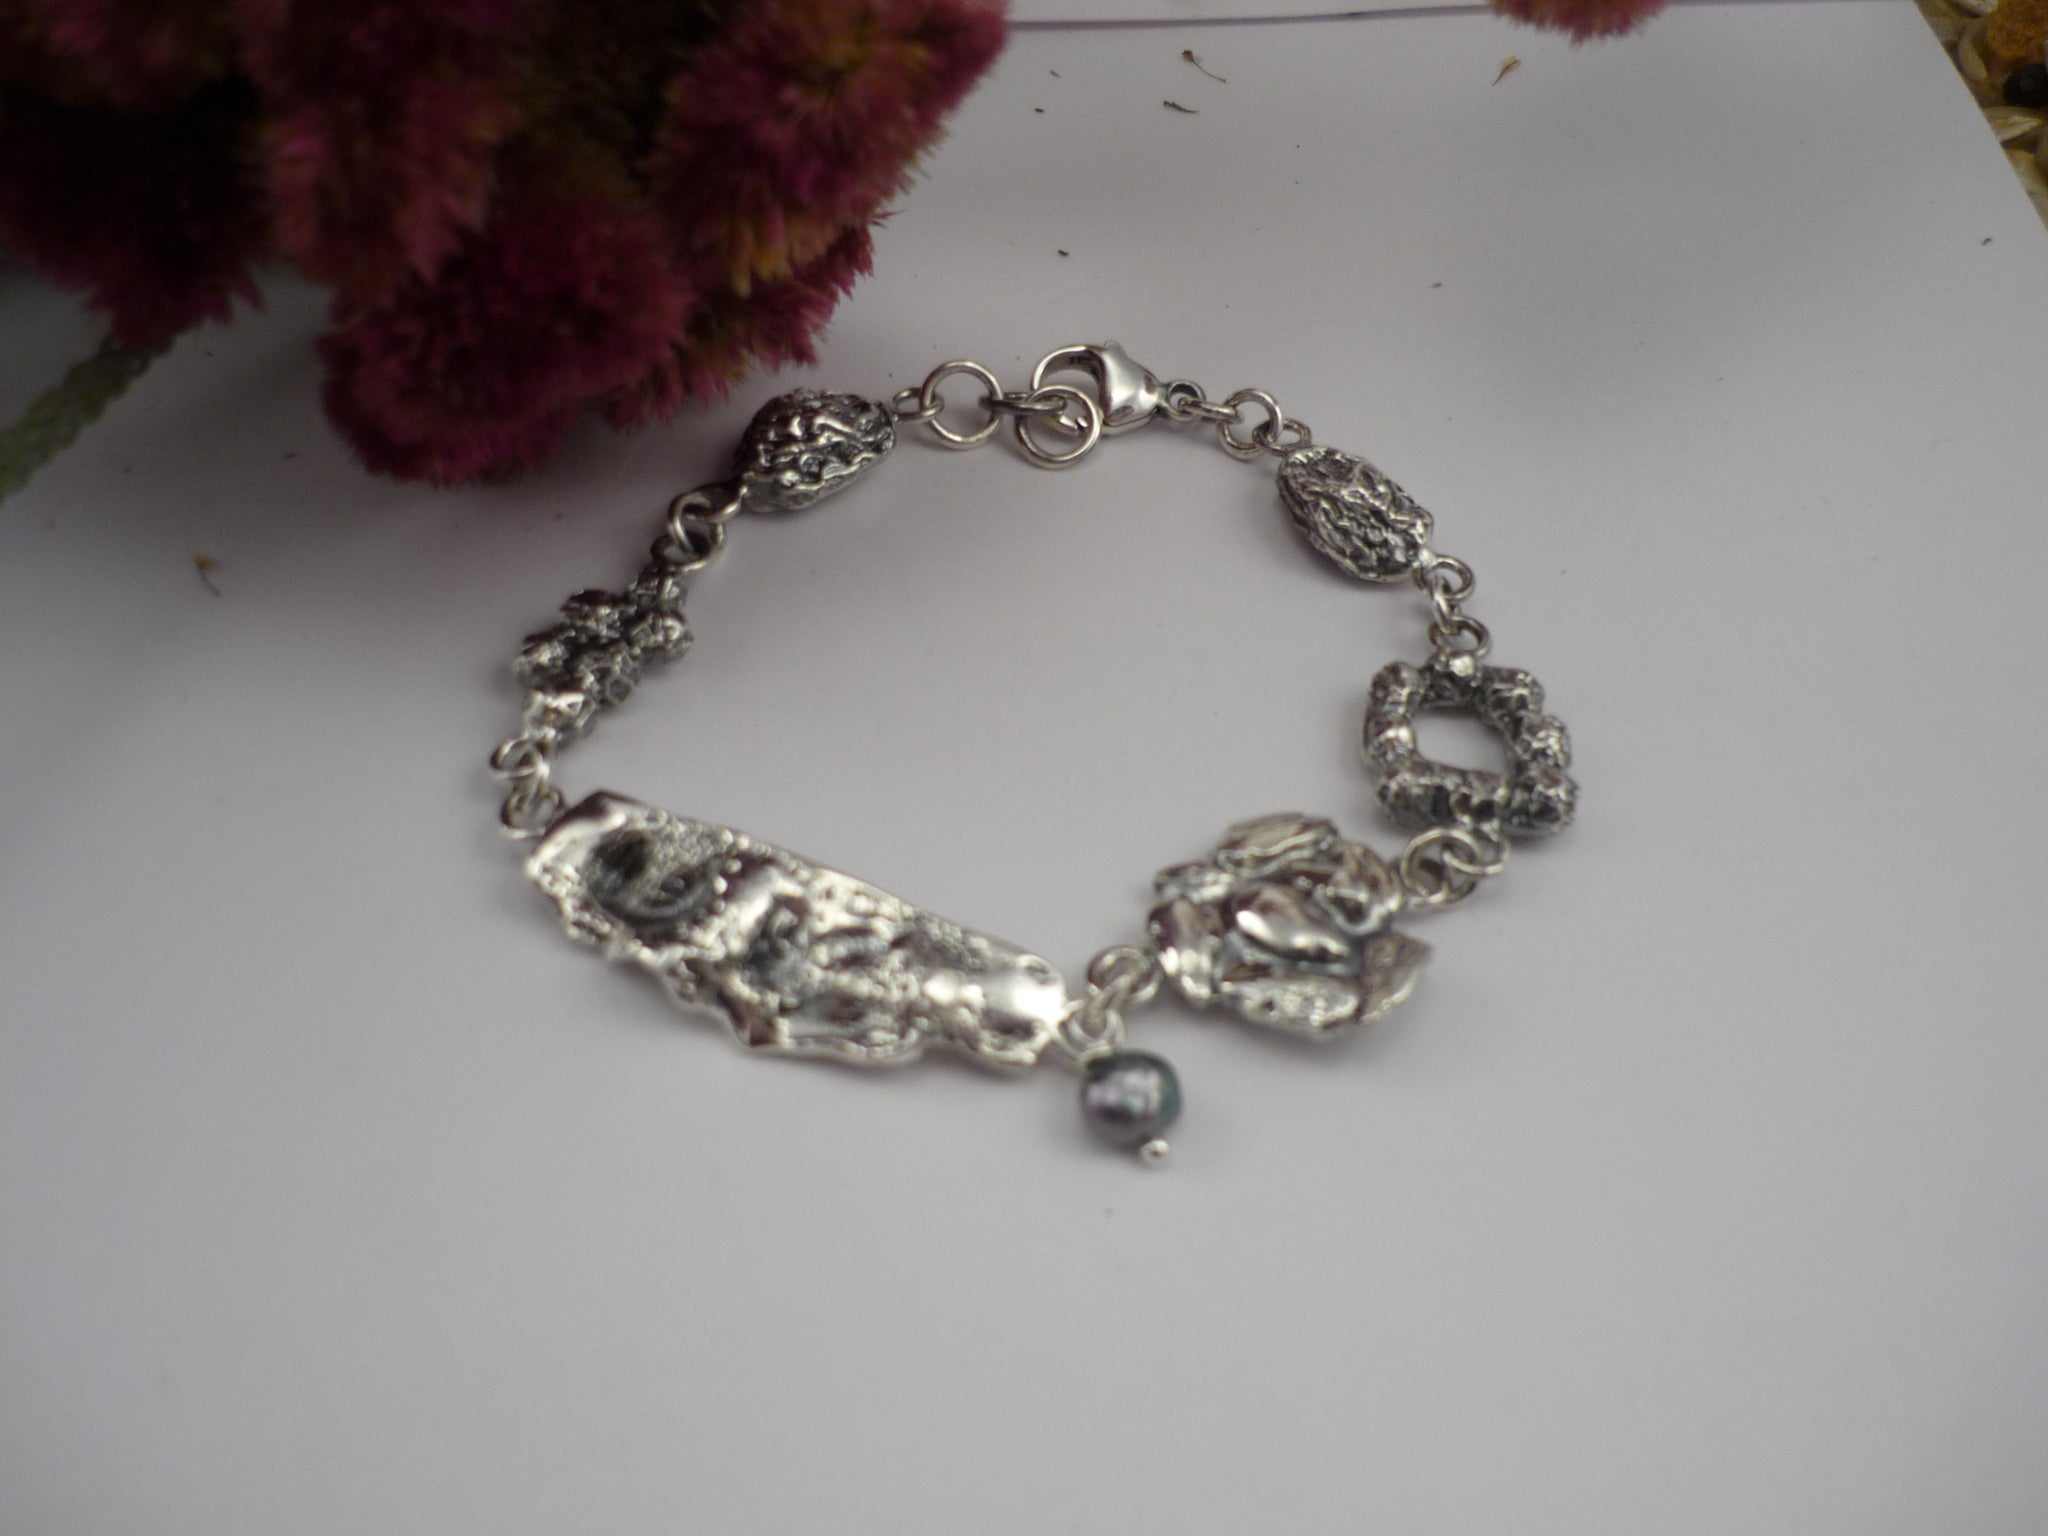 MAJESTIC MORNING, sterling silver bracelet with a creative texture designed from a slice of crispy bacon and more!